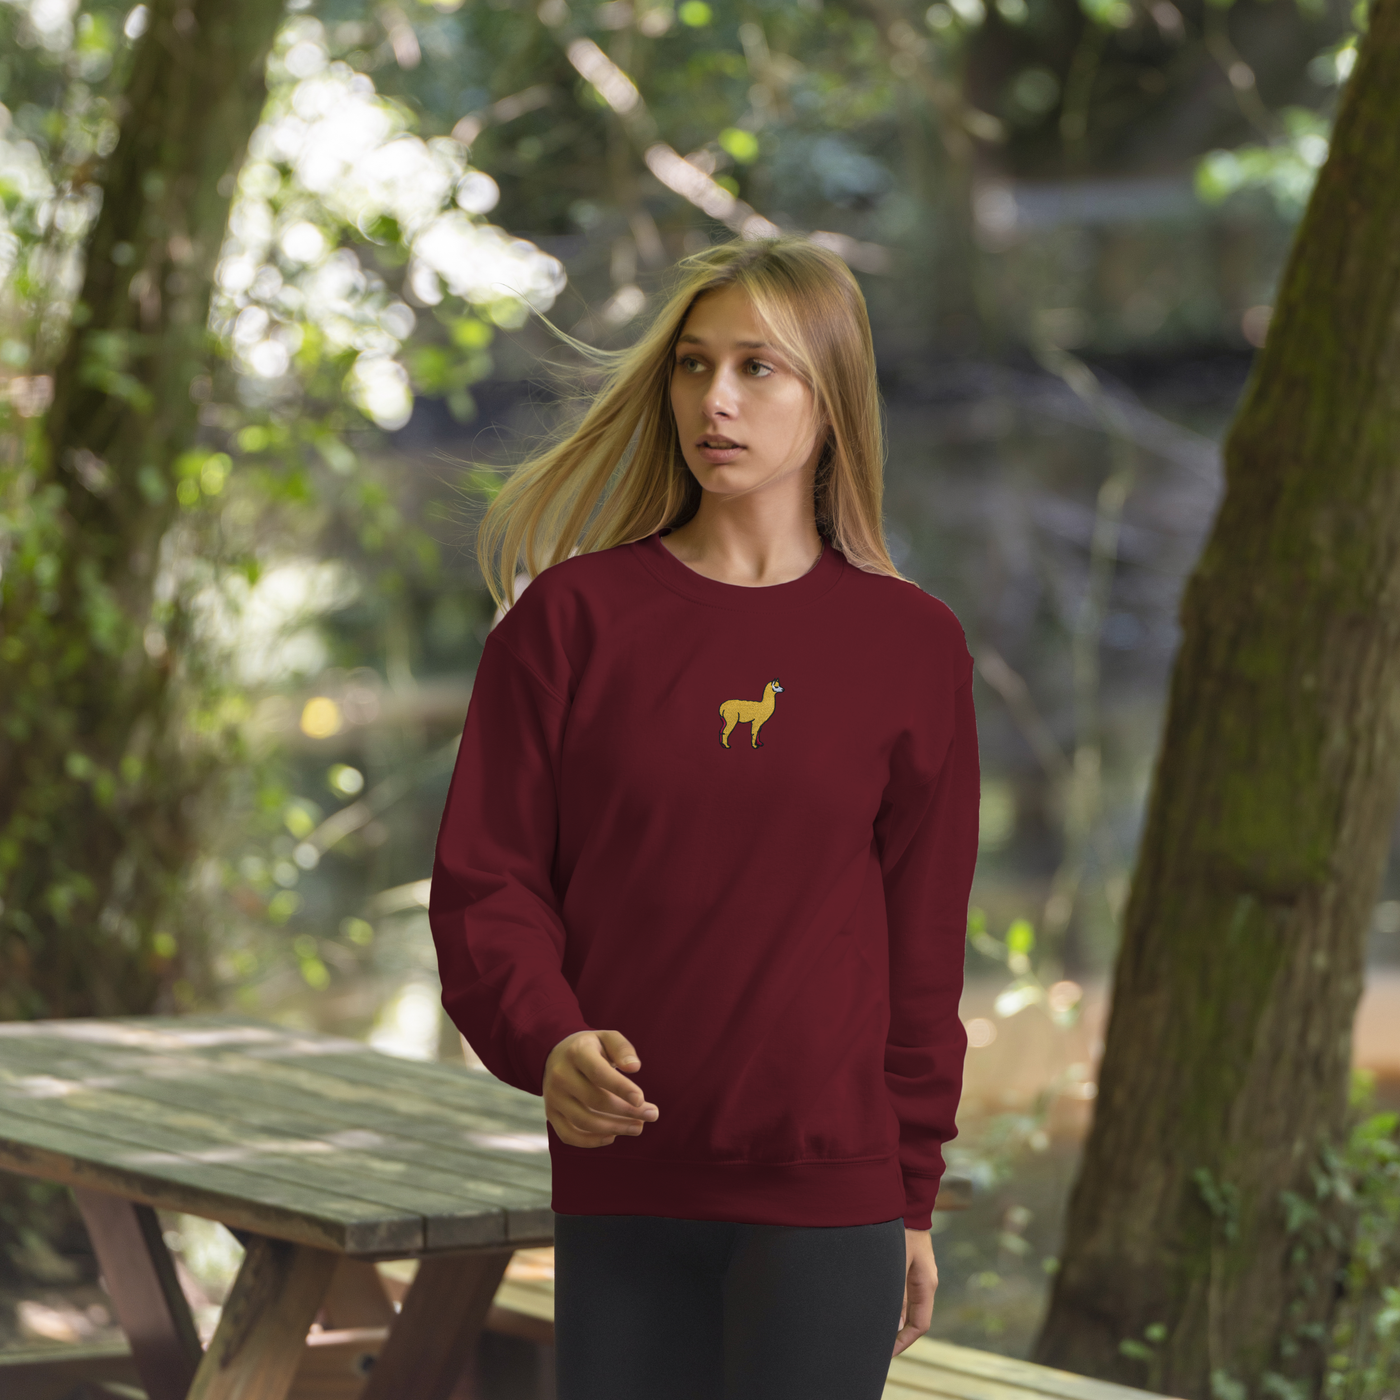 Bobby's Planet Women's Embroidered Alpaca Sweatshirt from South American Amazon Animals Collection in Maroon Color#color_maroon